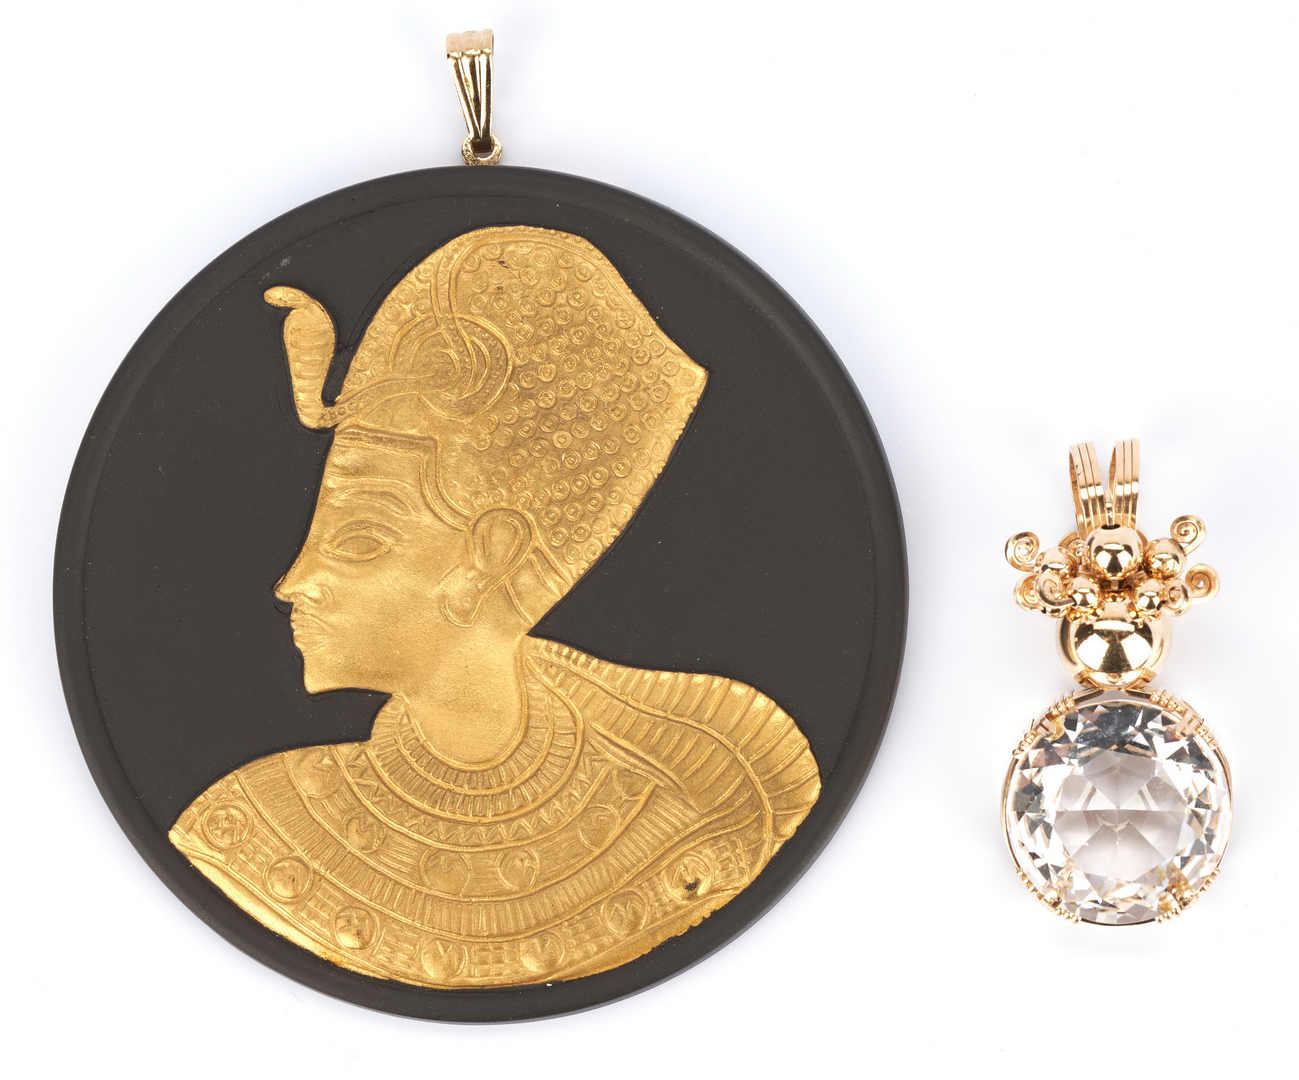 Lot 1040: Wedgwood Pendant with Egyptian Motif and 14K Pendant with Quartz